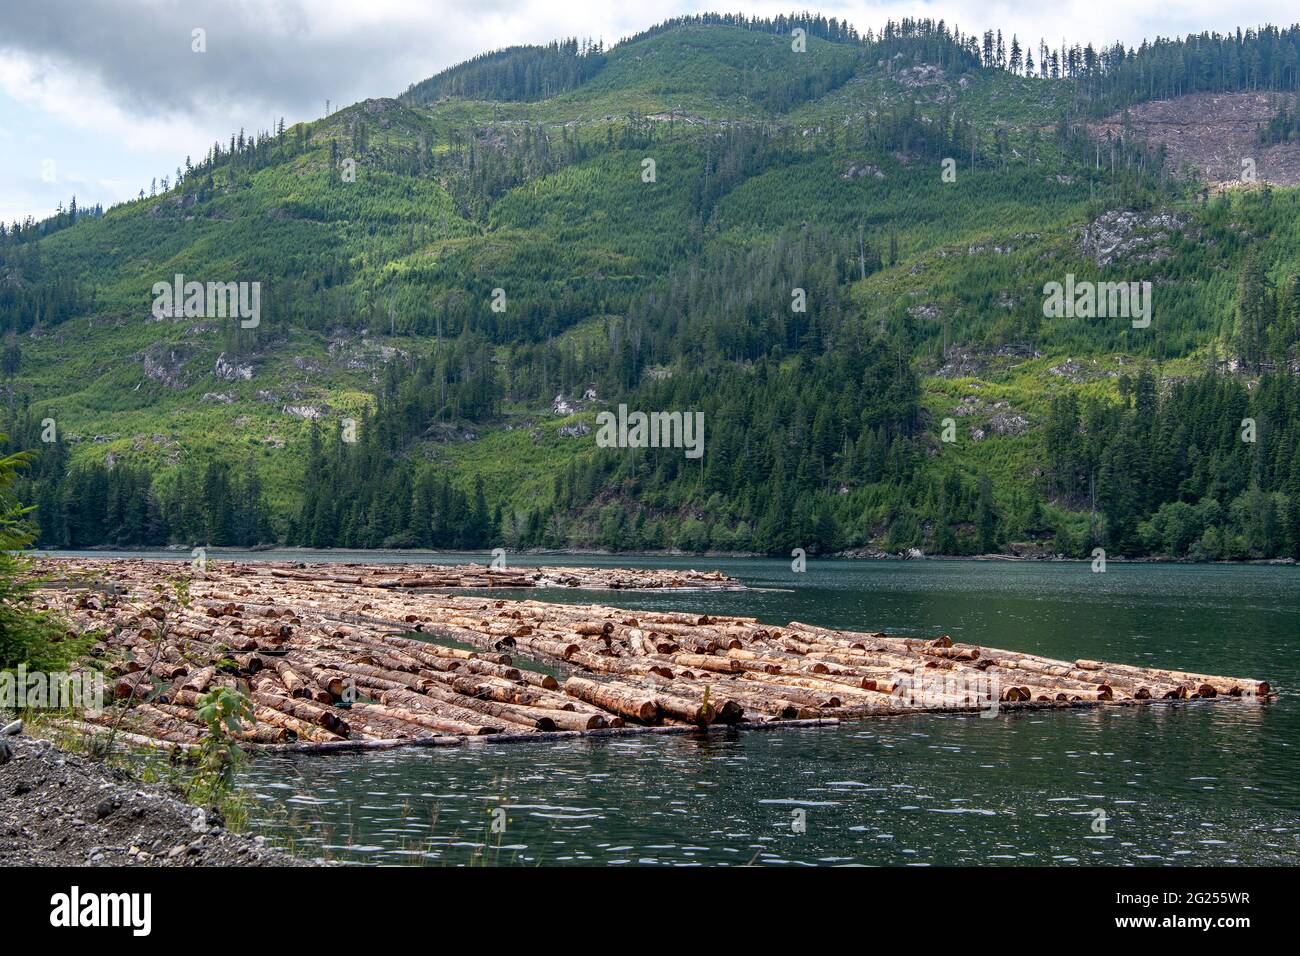 Timber logs floating in log boom in the ocean, Port Alice, Vancouver Island, British Columbia, Canada Stock Photo